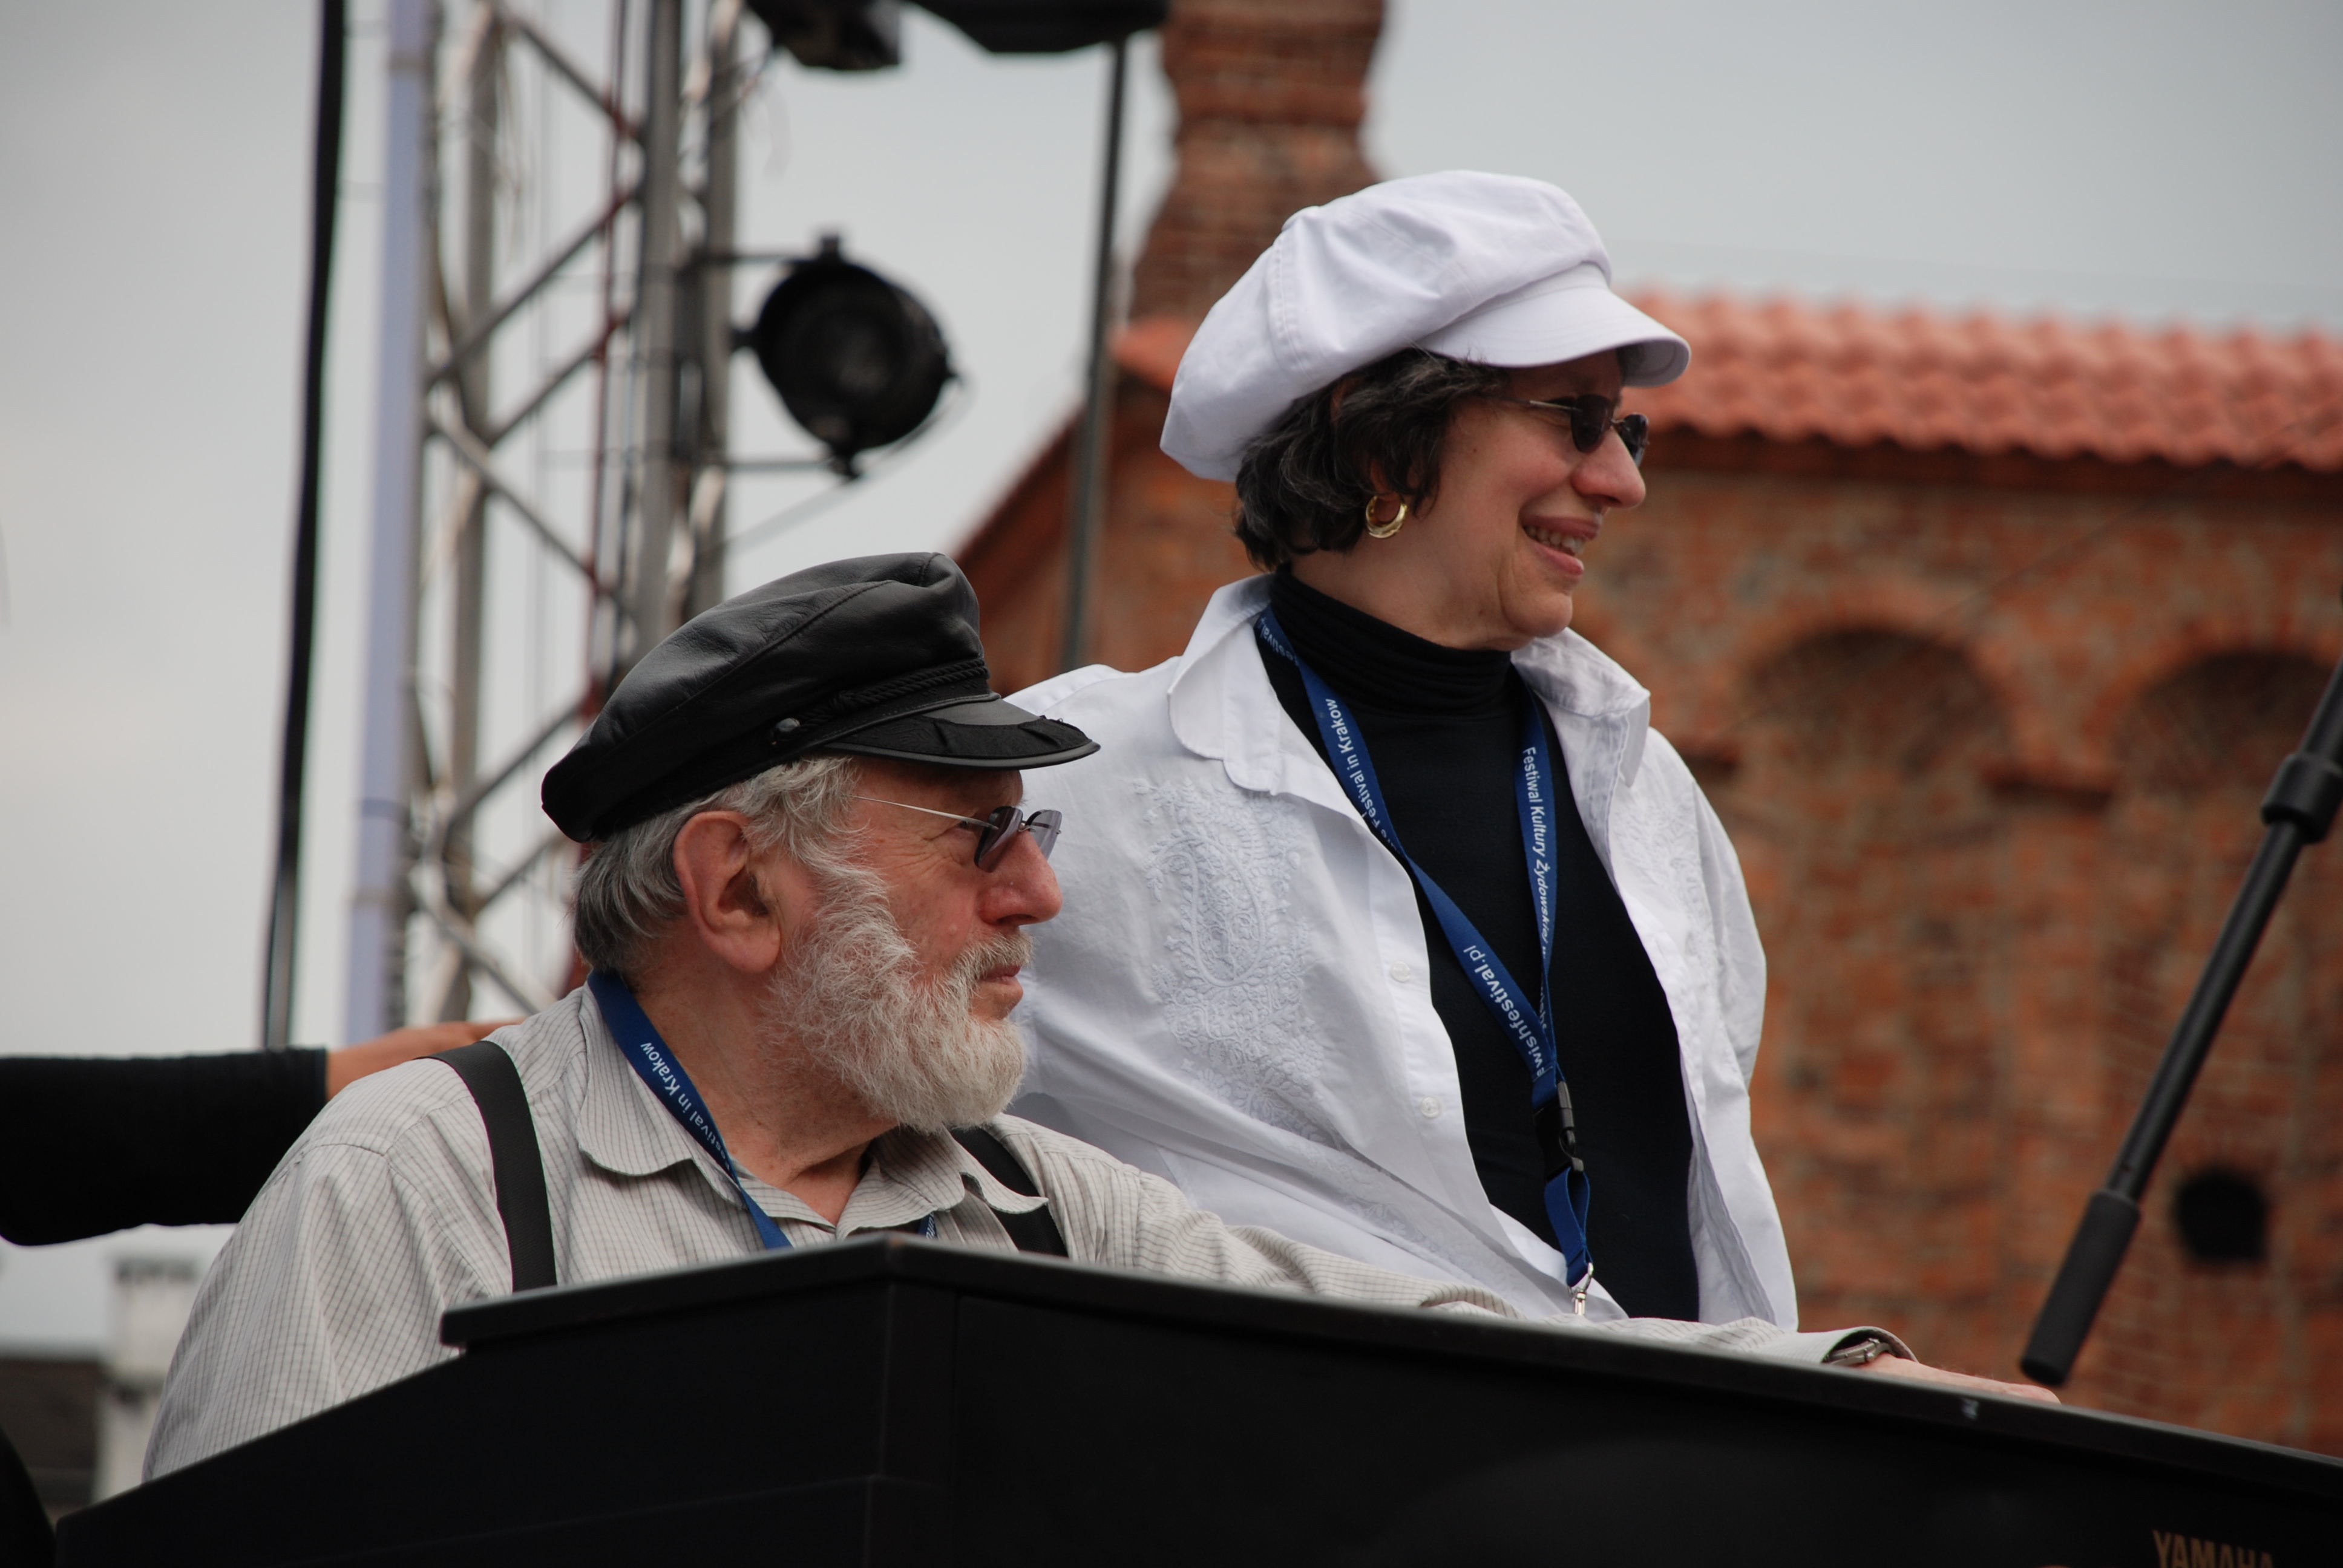 Theodore Bikel and Tamara Brooks on stage in Cracow, Poland